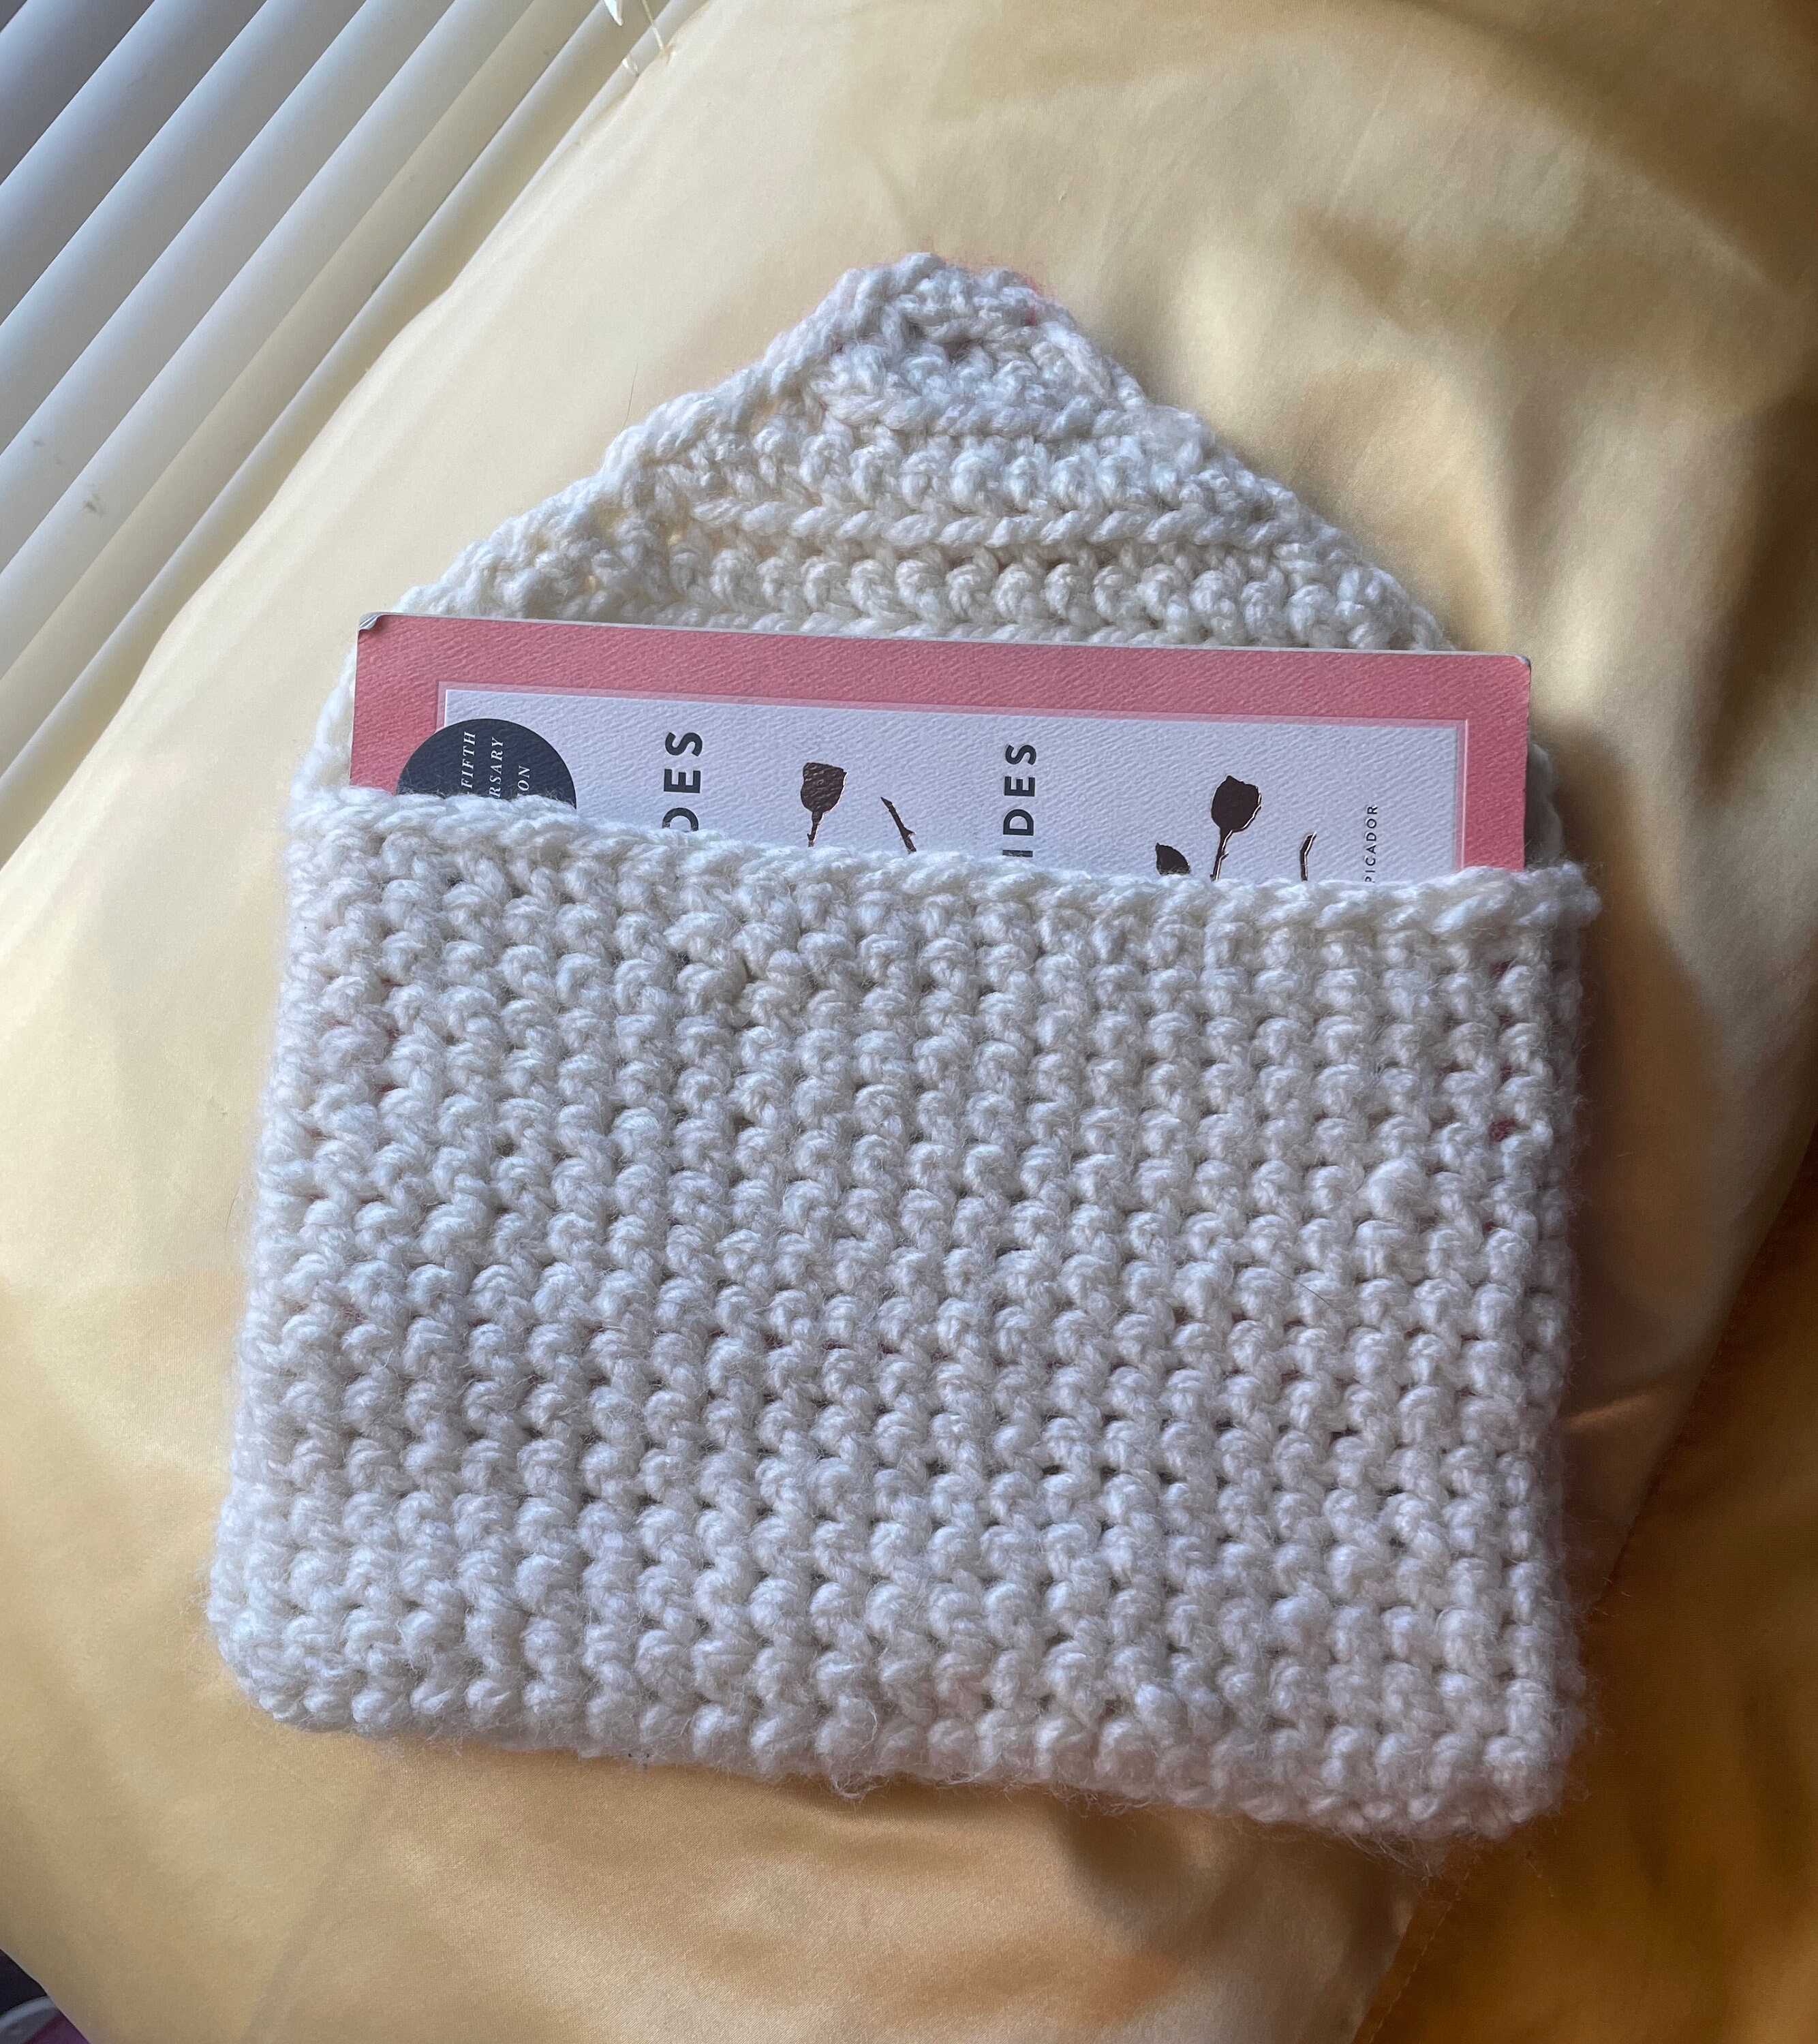 how to crochet a love letter book sleeve/wallet